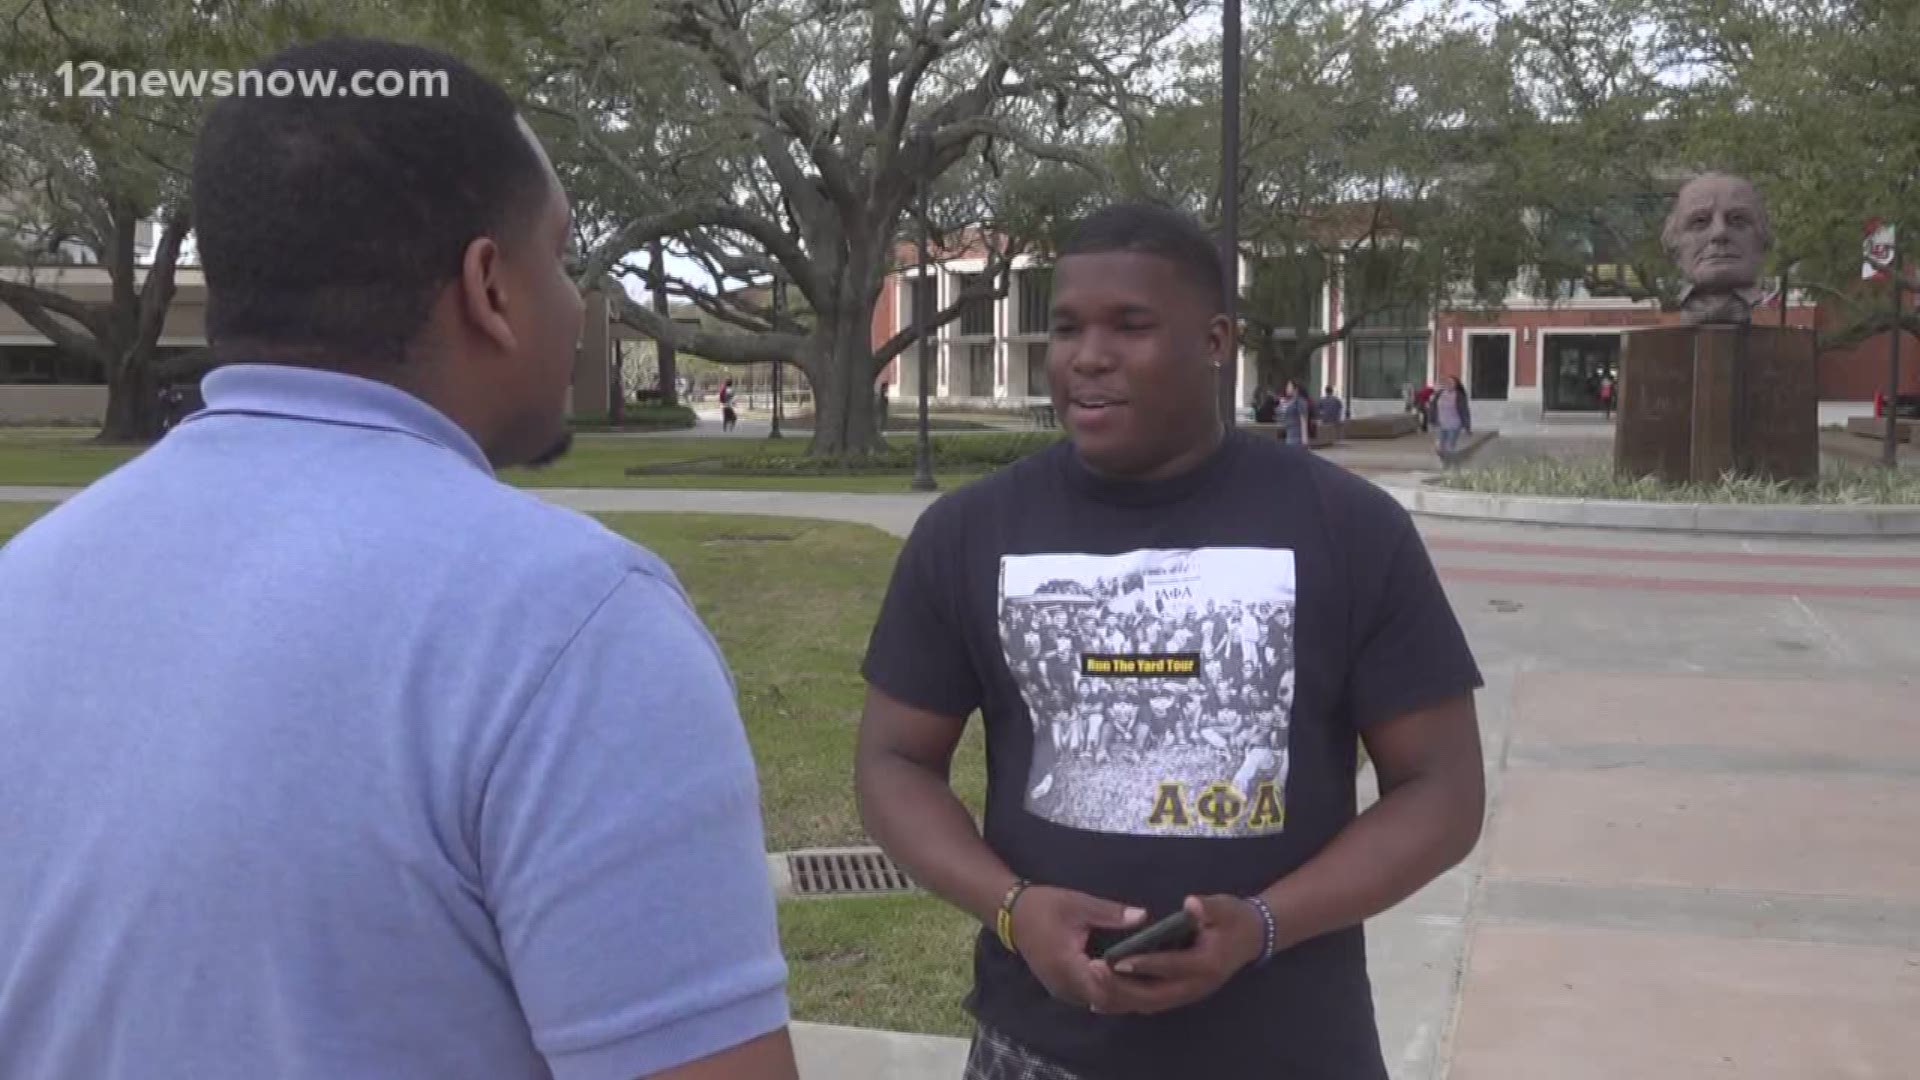 Some voters at Lamar University say they're excited and ready to exercise the right to vote